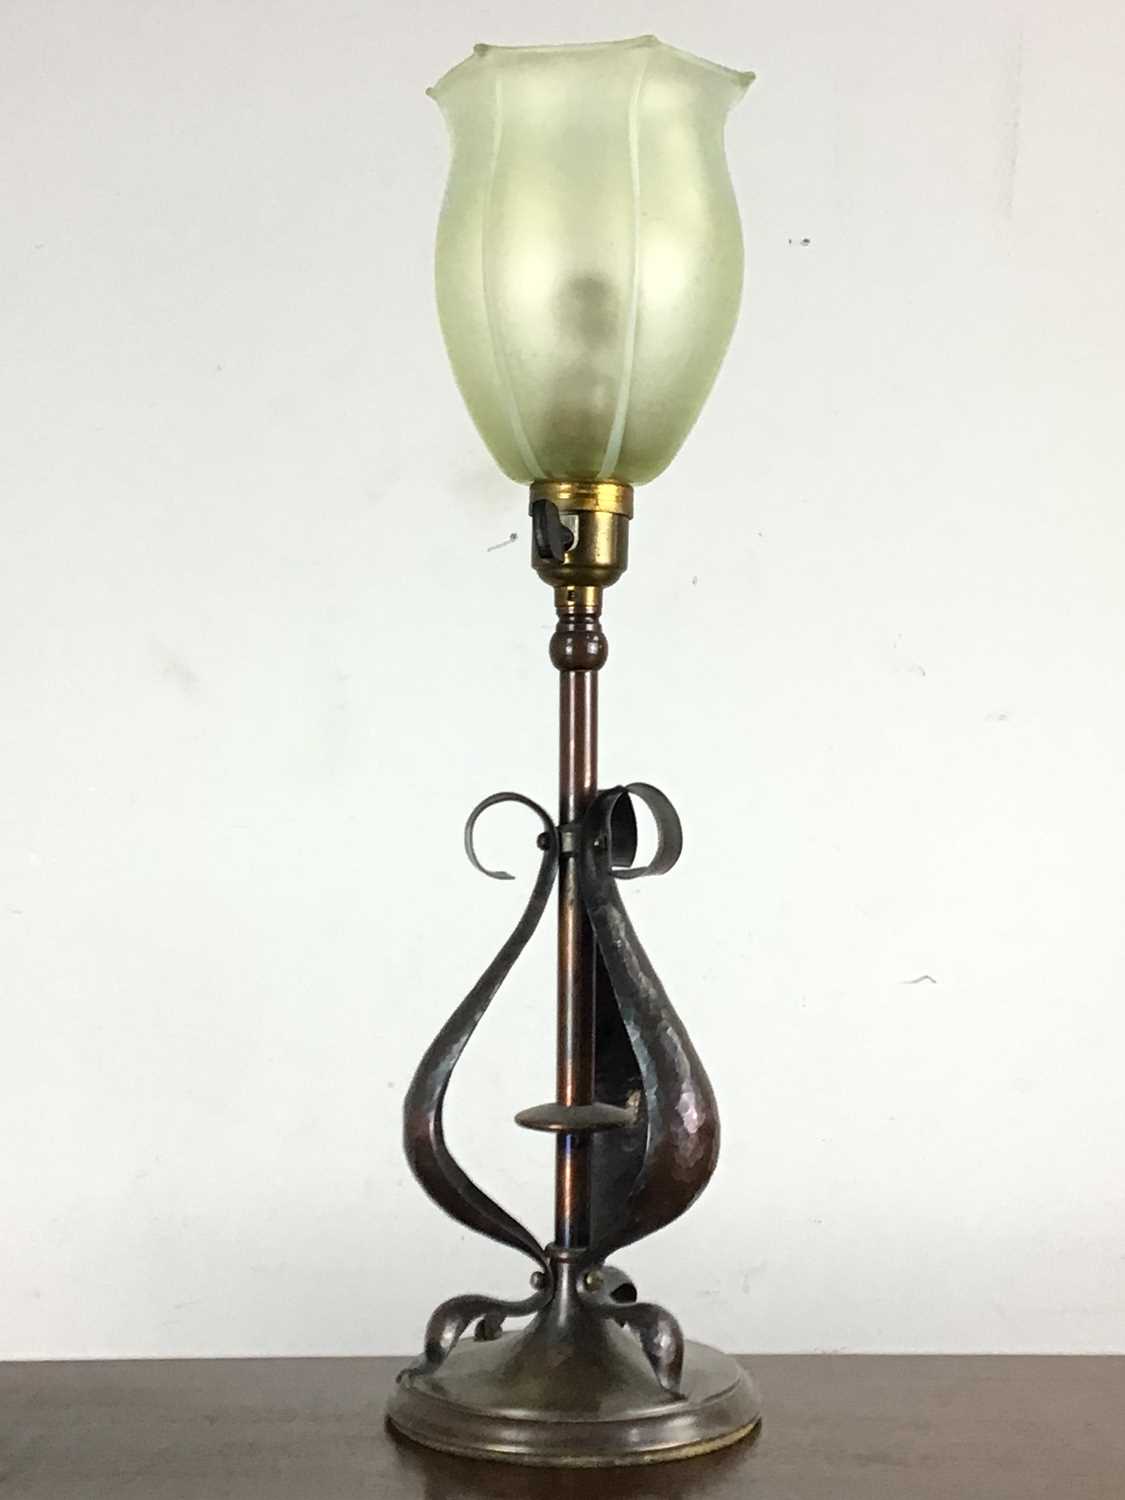 Lot 390 - ARTS & CRAFTS TABLE LAMP